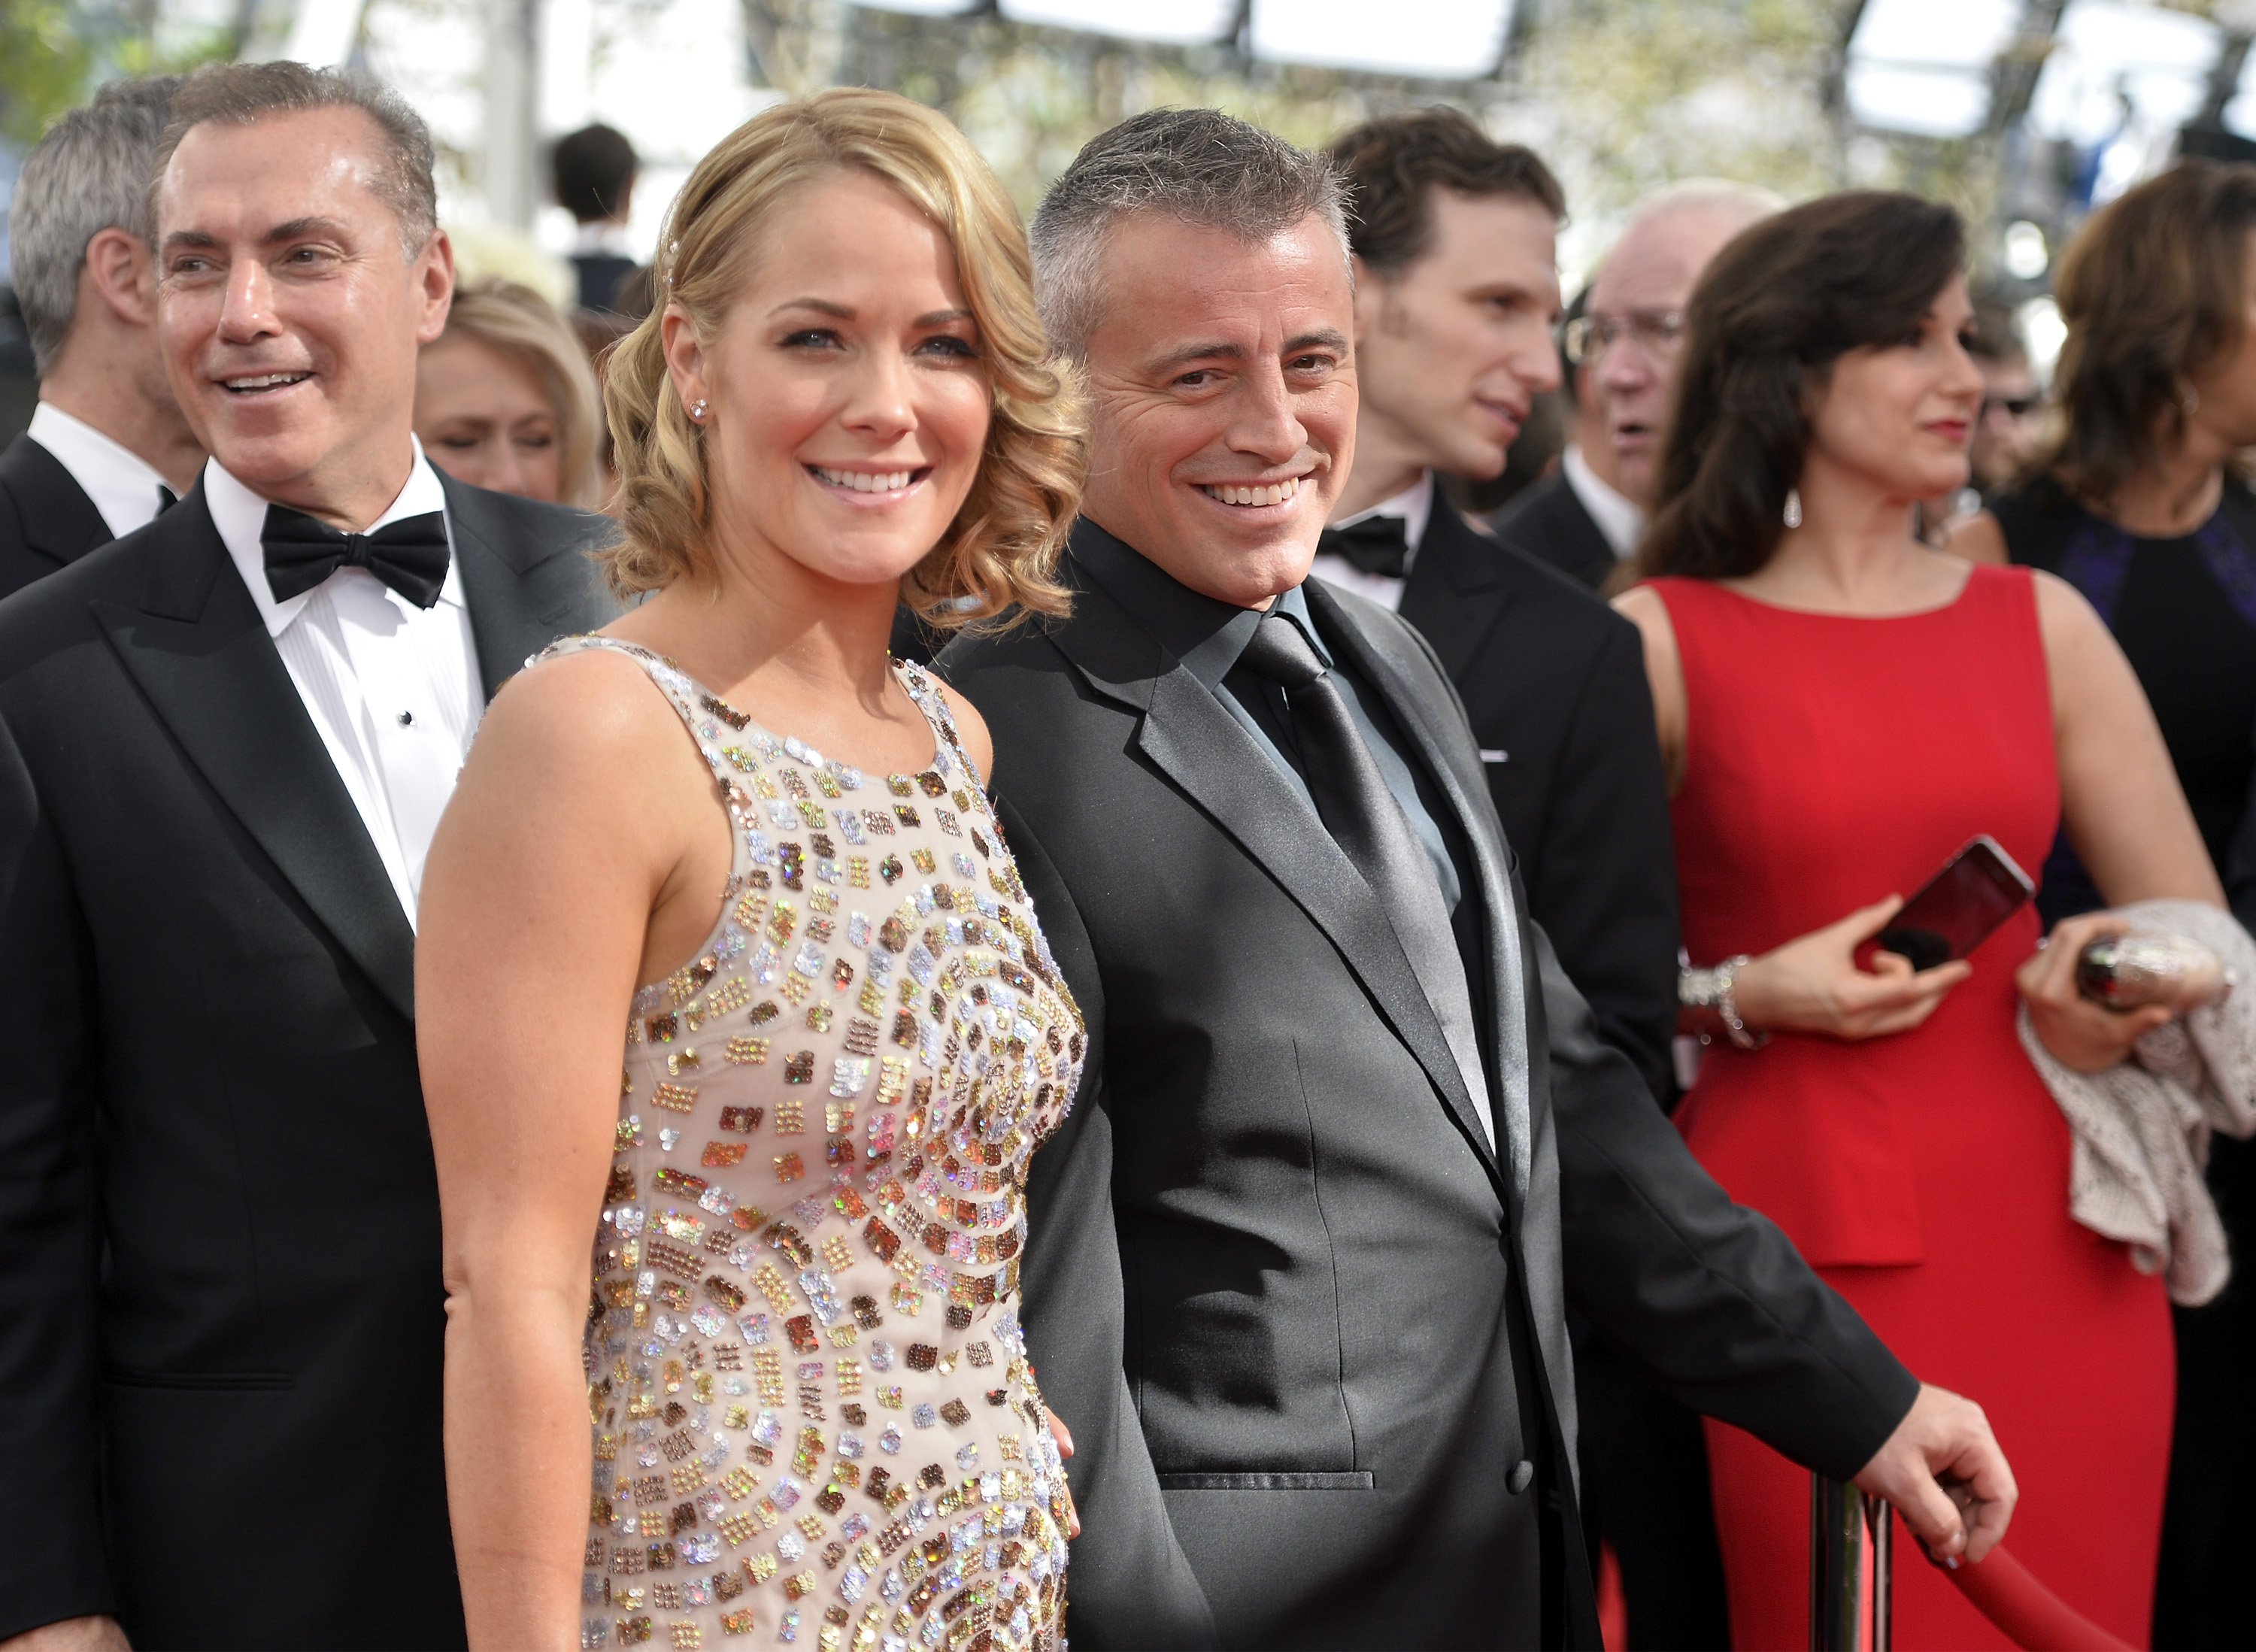 Matt LeBlanc and Andrea Anders arrive at the 65th Annual Primetime Emmy Awards held at Nokia Theatre L.A. Live on September 22, 2013 in Los Angeles, California. | Source: Getty Images.